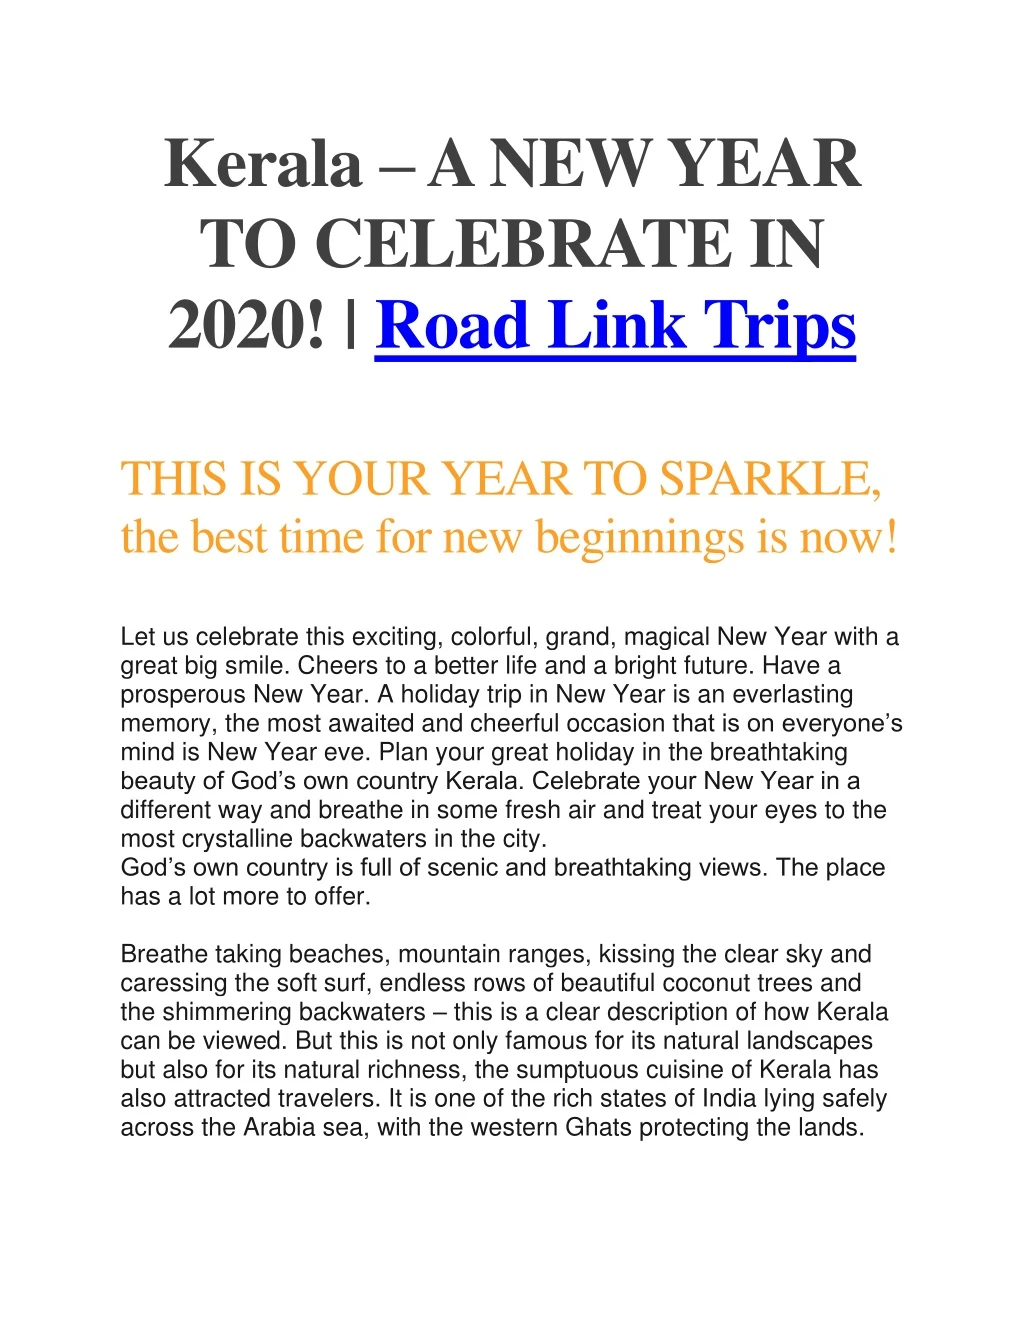 kerala a new year to celebrate in 2020 road link